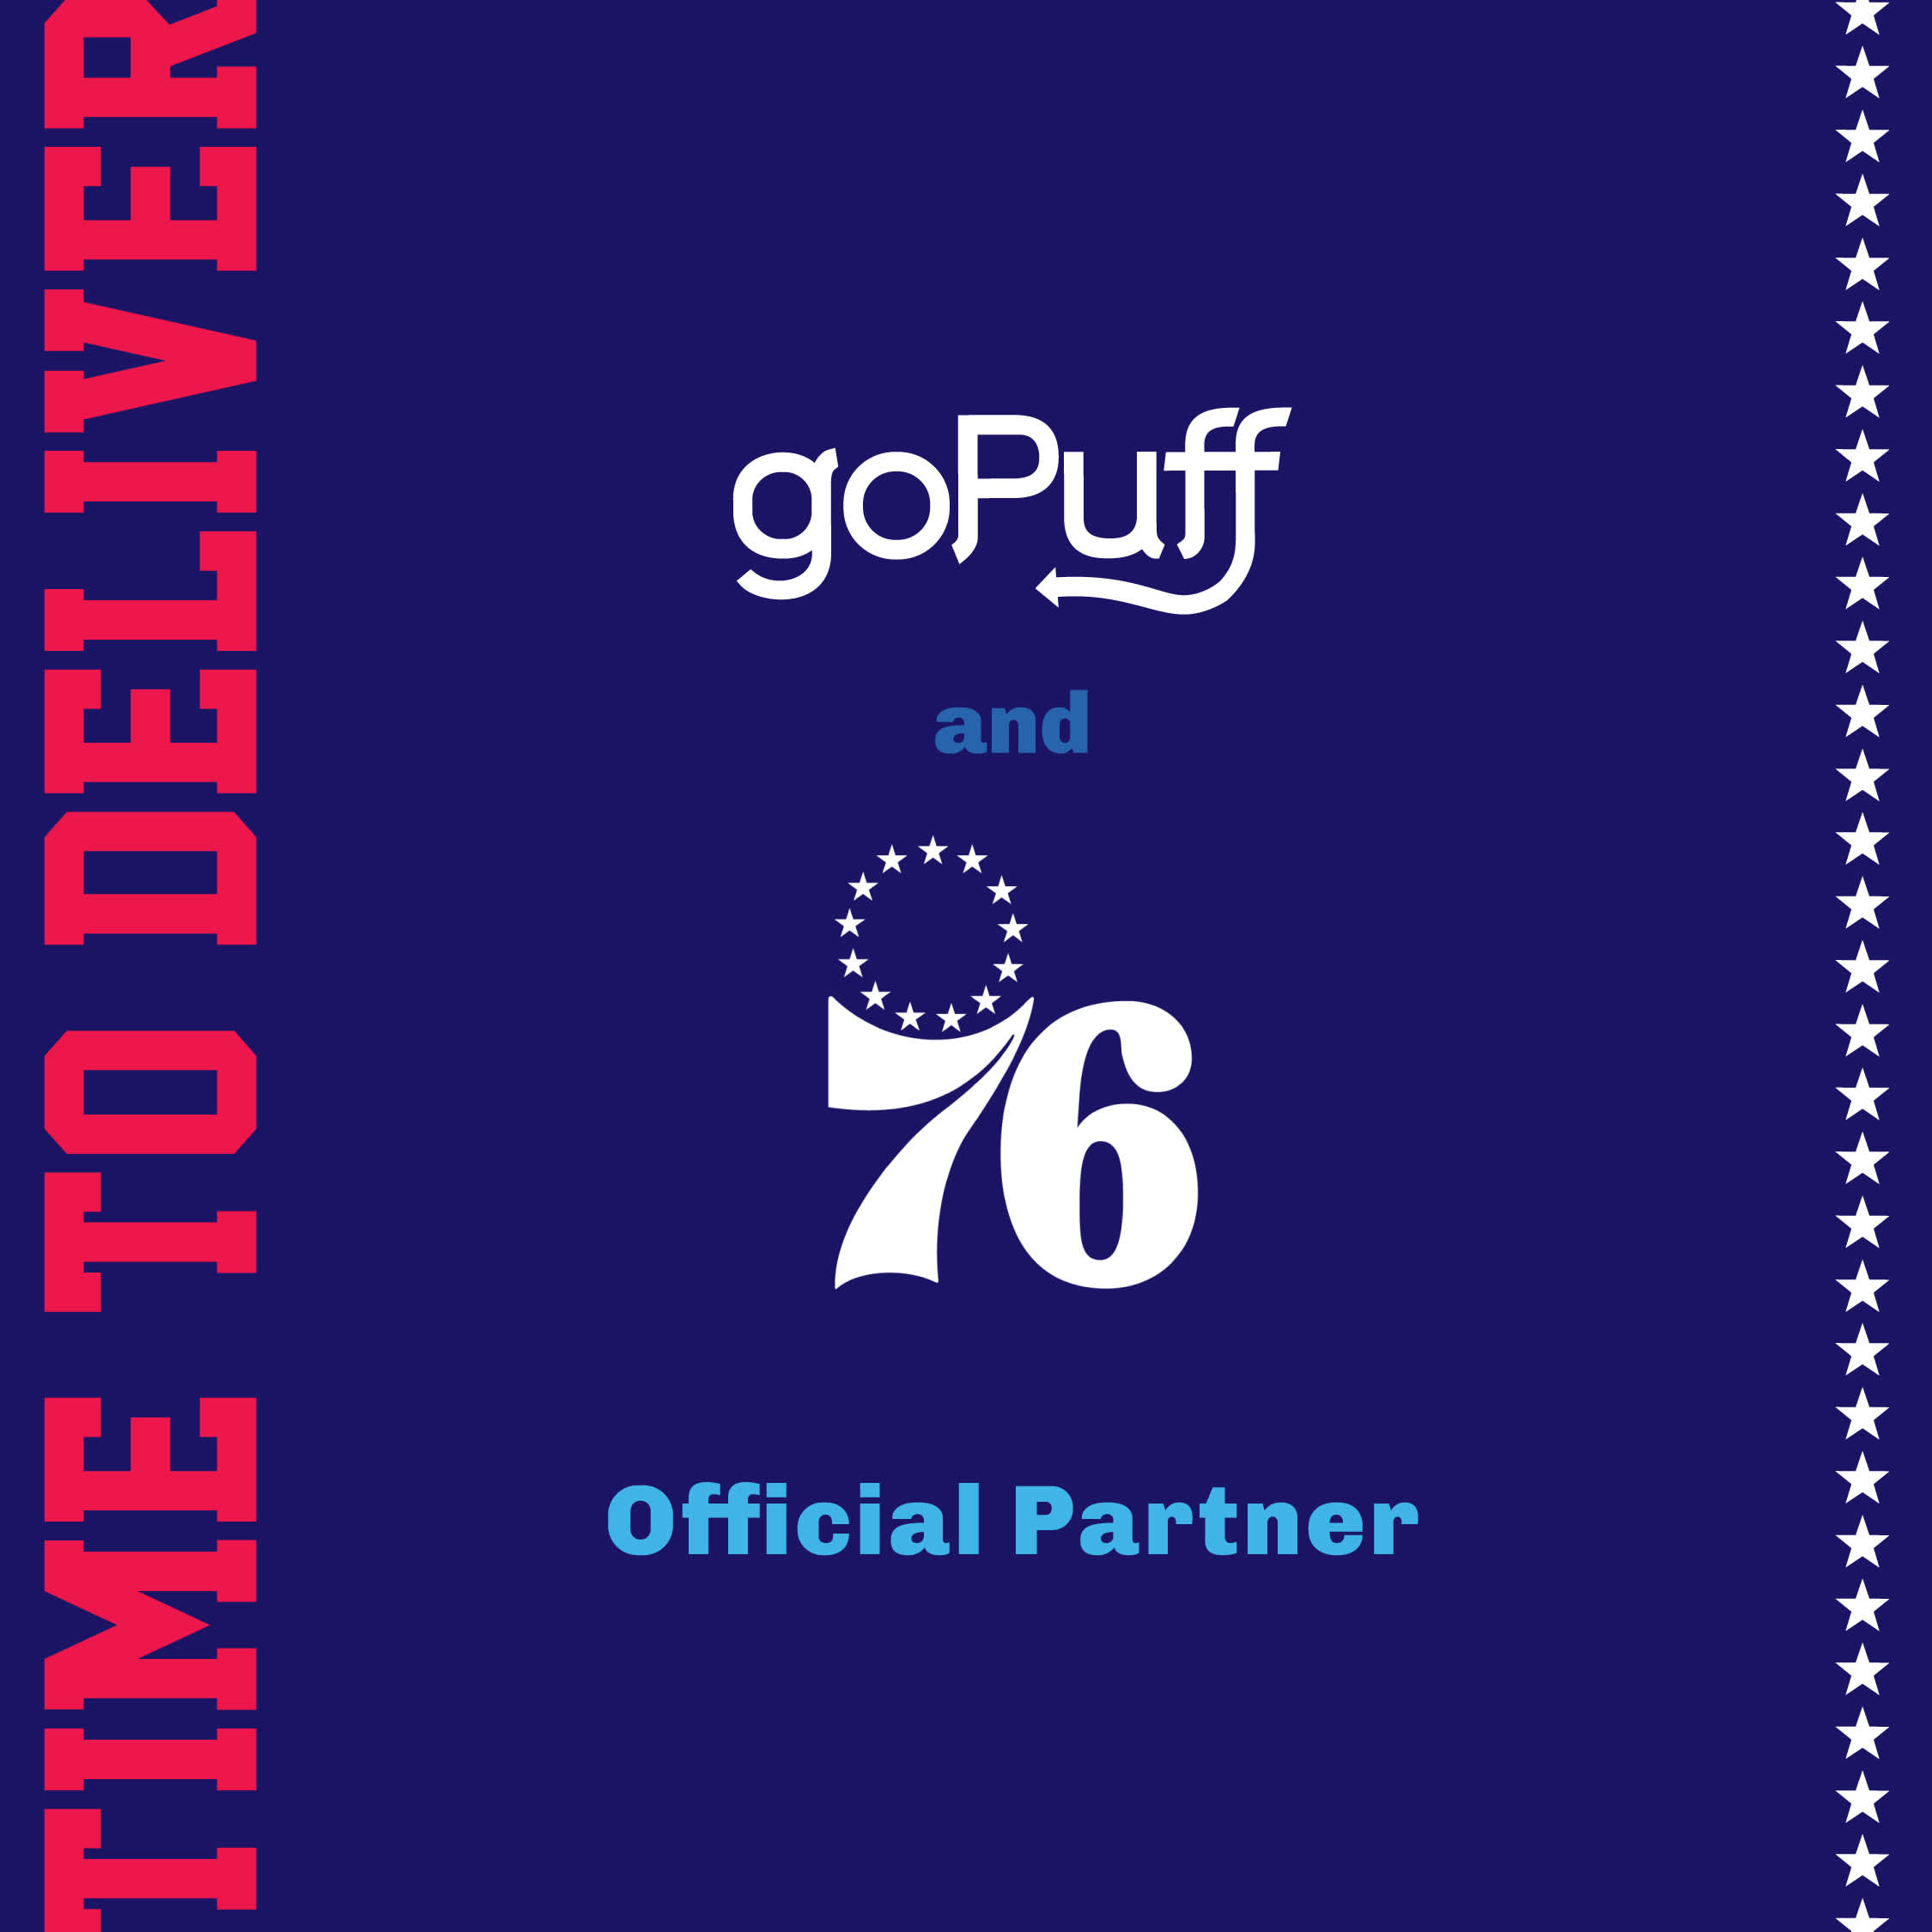 The Gopuff and Philadelphia 76ers logos on a blue background announcing a new partnership